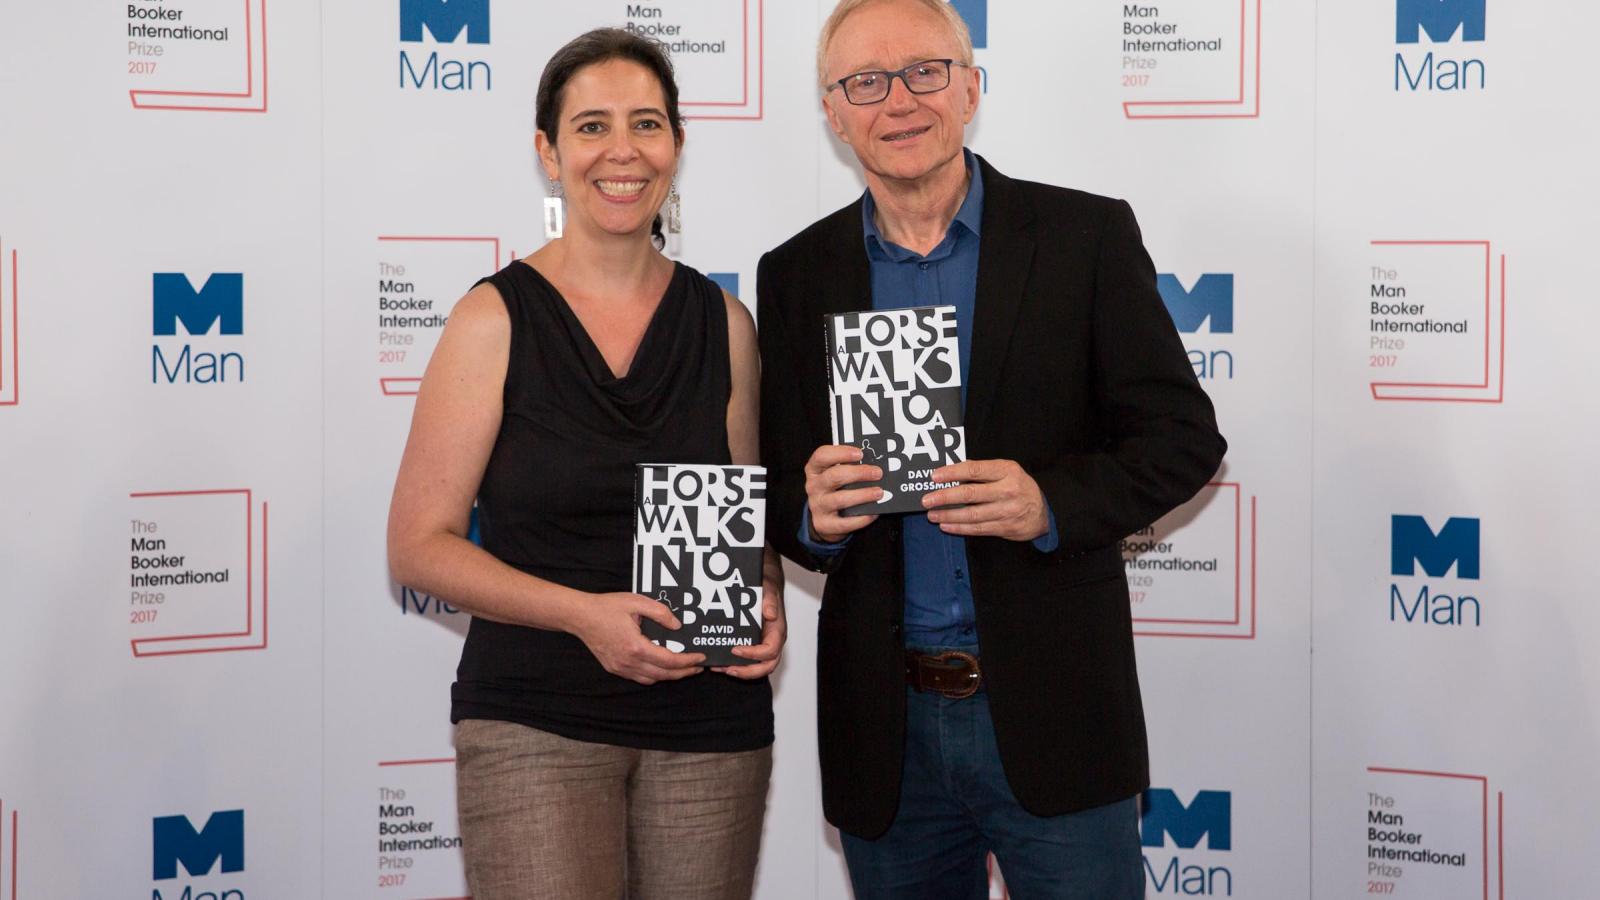 Translator Jessica Cohen and Israeli author David Grossman at the Man Booker Prize ceremony in London. Photo courtesy of The Man Booker Prizes